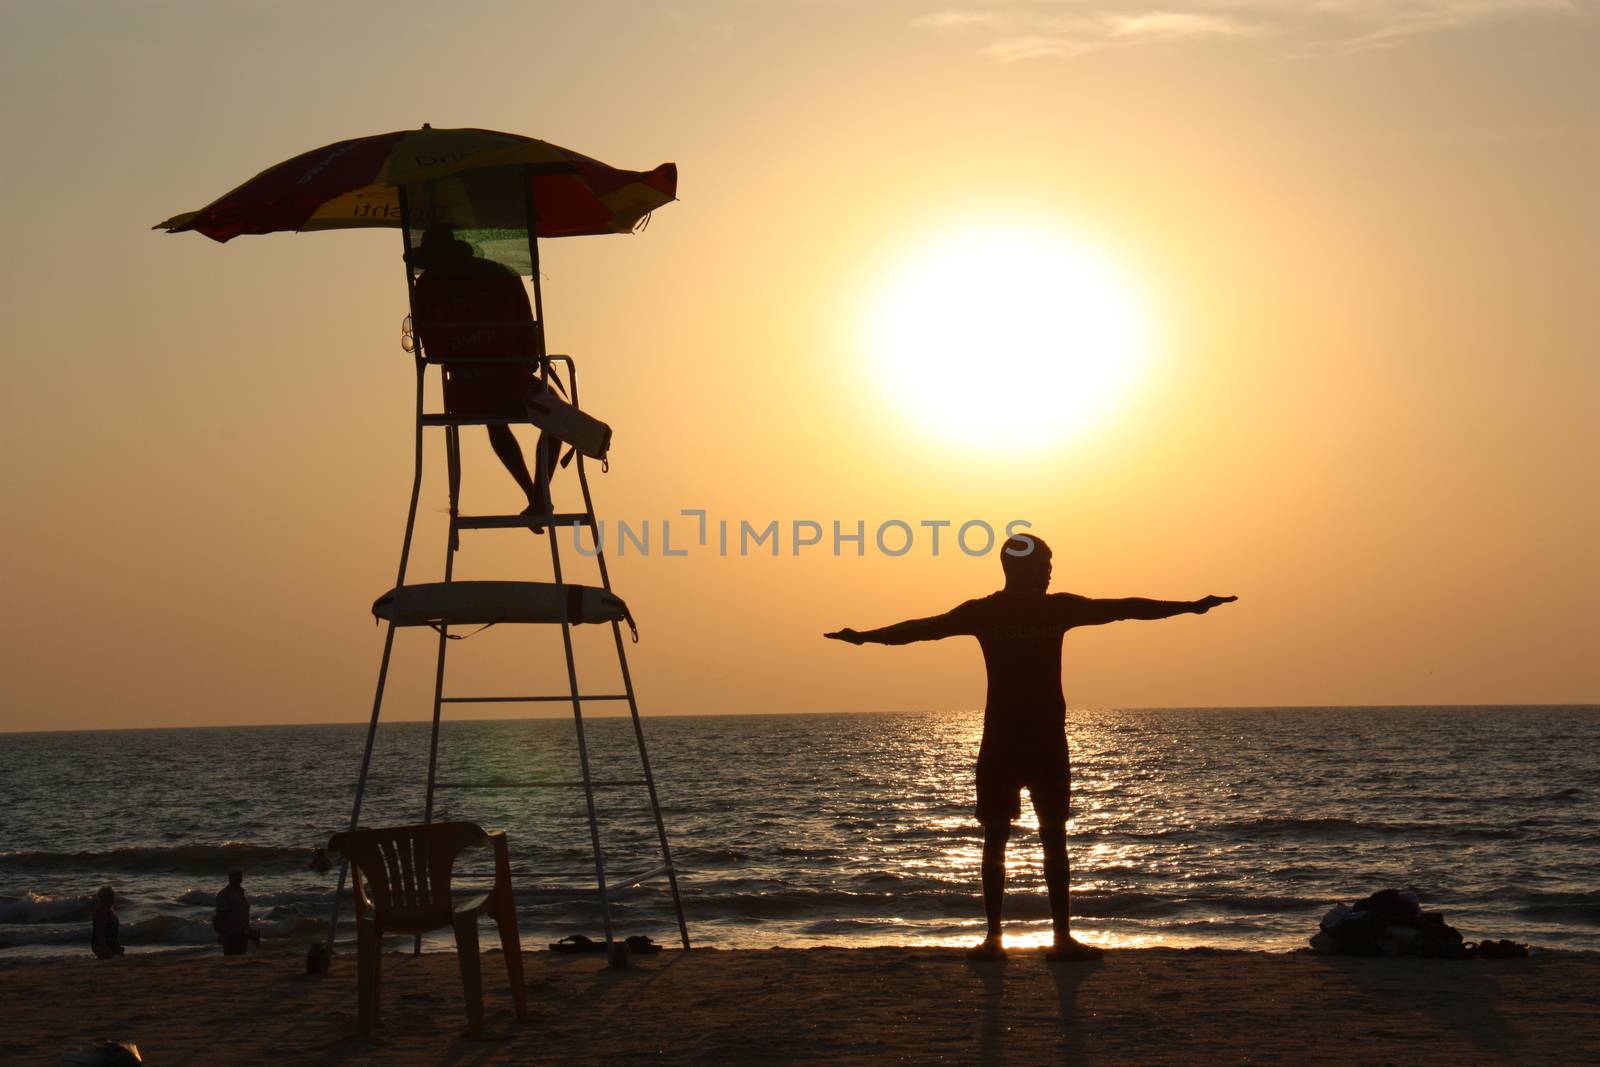 The man is engaged in sports at sunset near the lifeguard tower